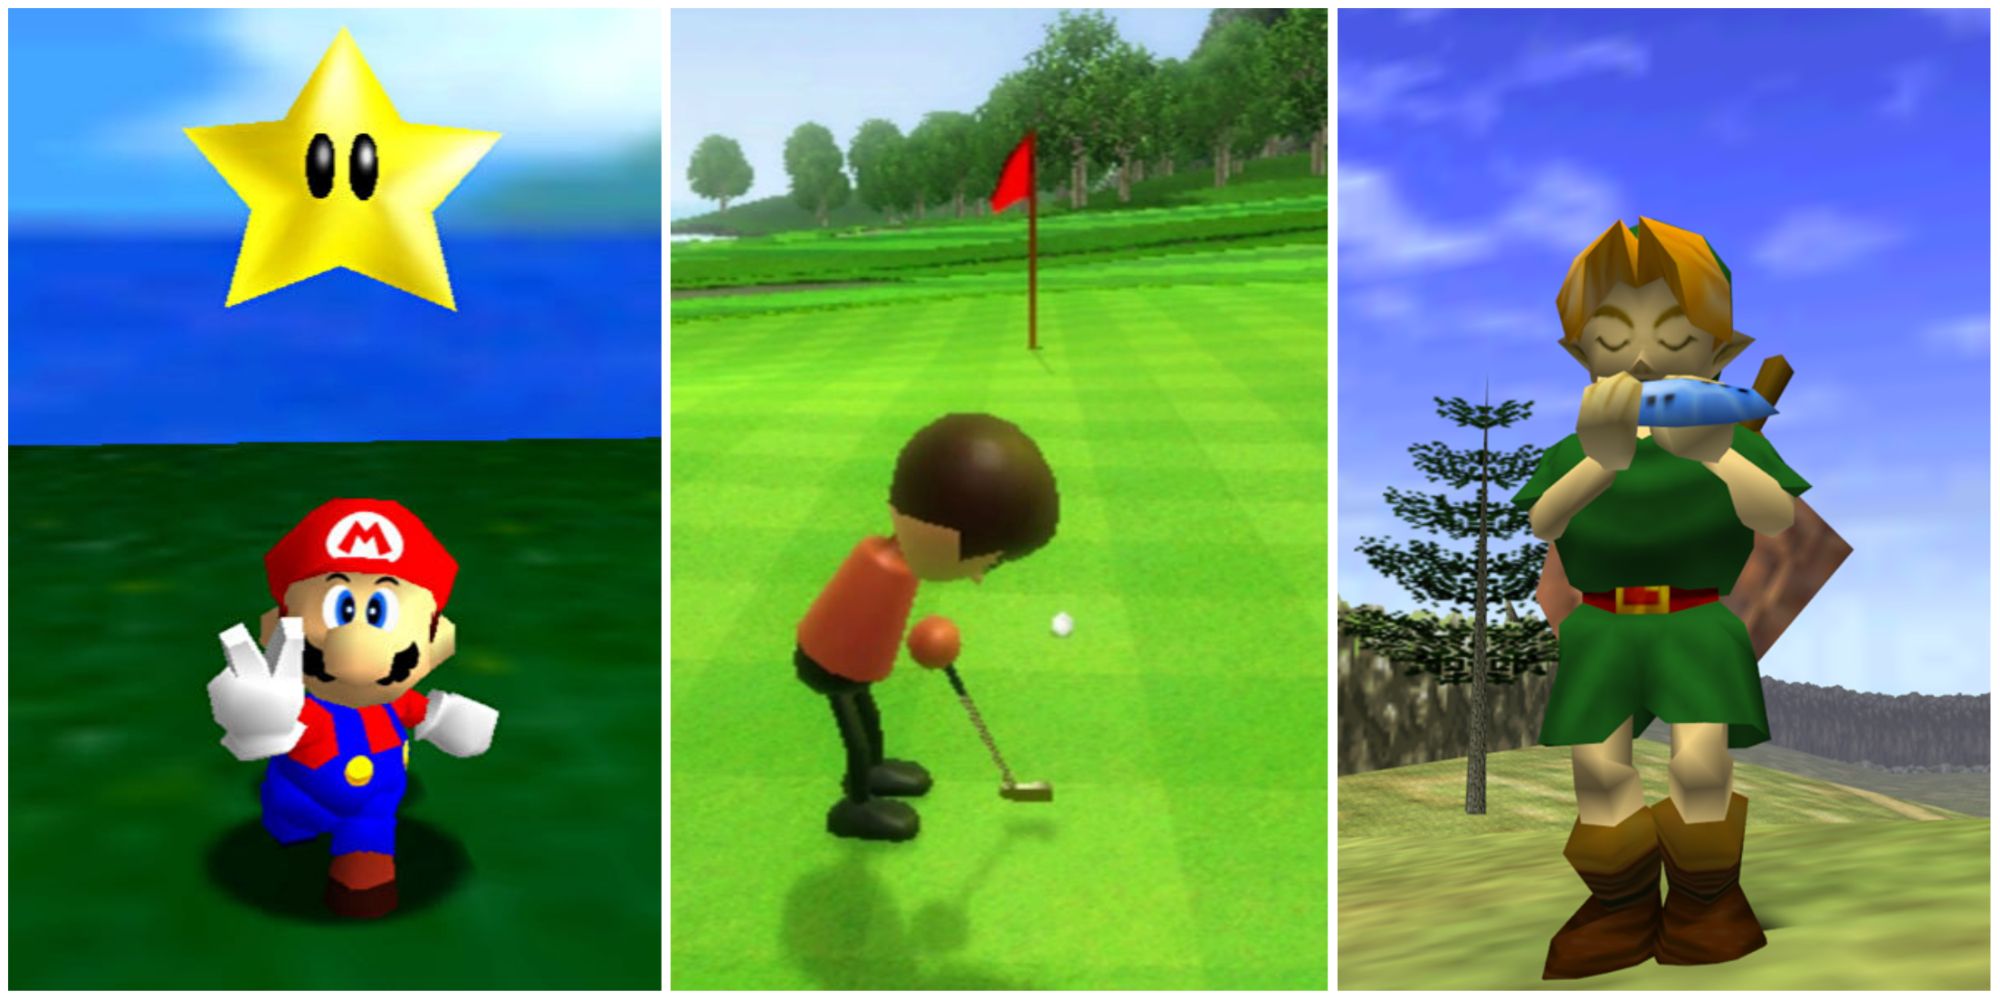 A split image of gameplay from Super Mario 64, Wii Sports, and Legend of Zelda